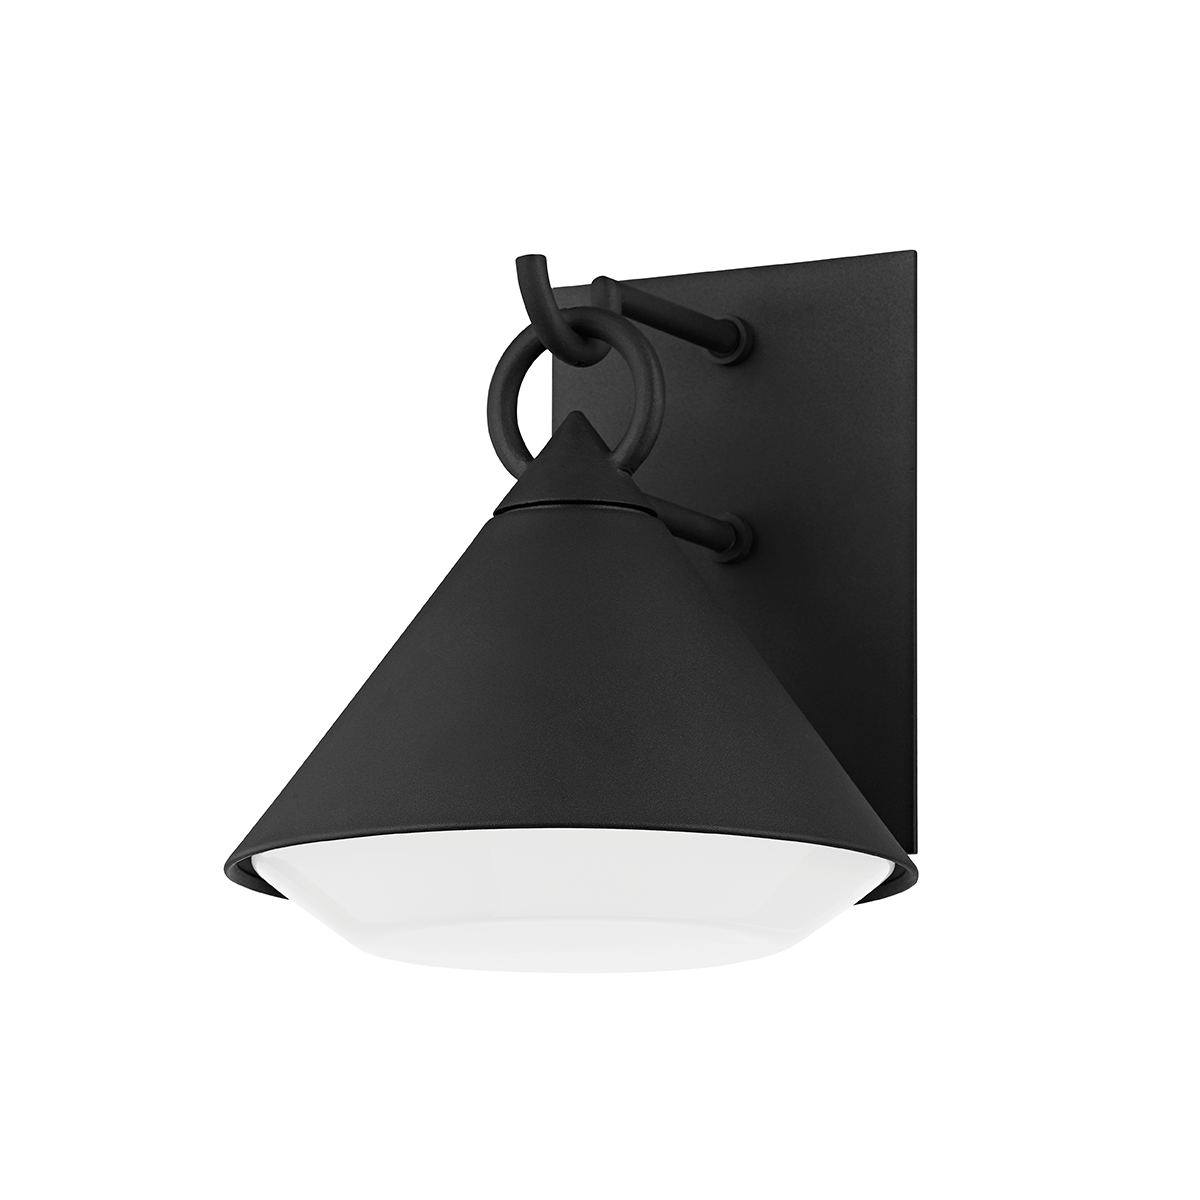 Troy Lighting 1 LIGHT SMALL EXTERIOR WALL SCONCE B9209 Outdoor l Wall Troy Lighting TEXTURE BLACK  